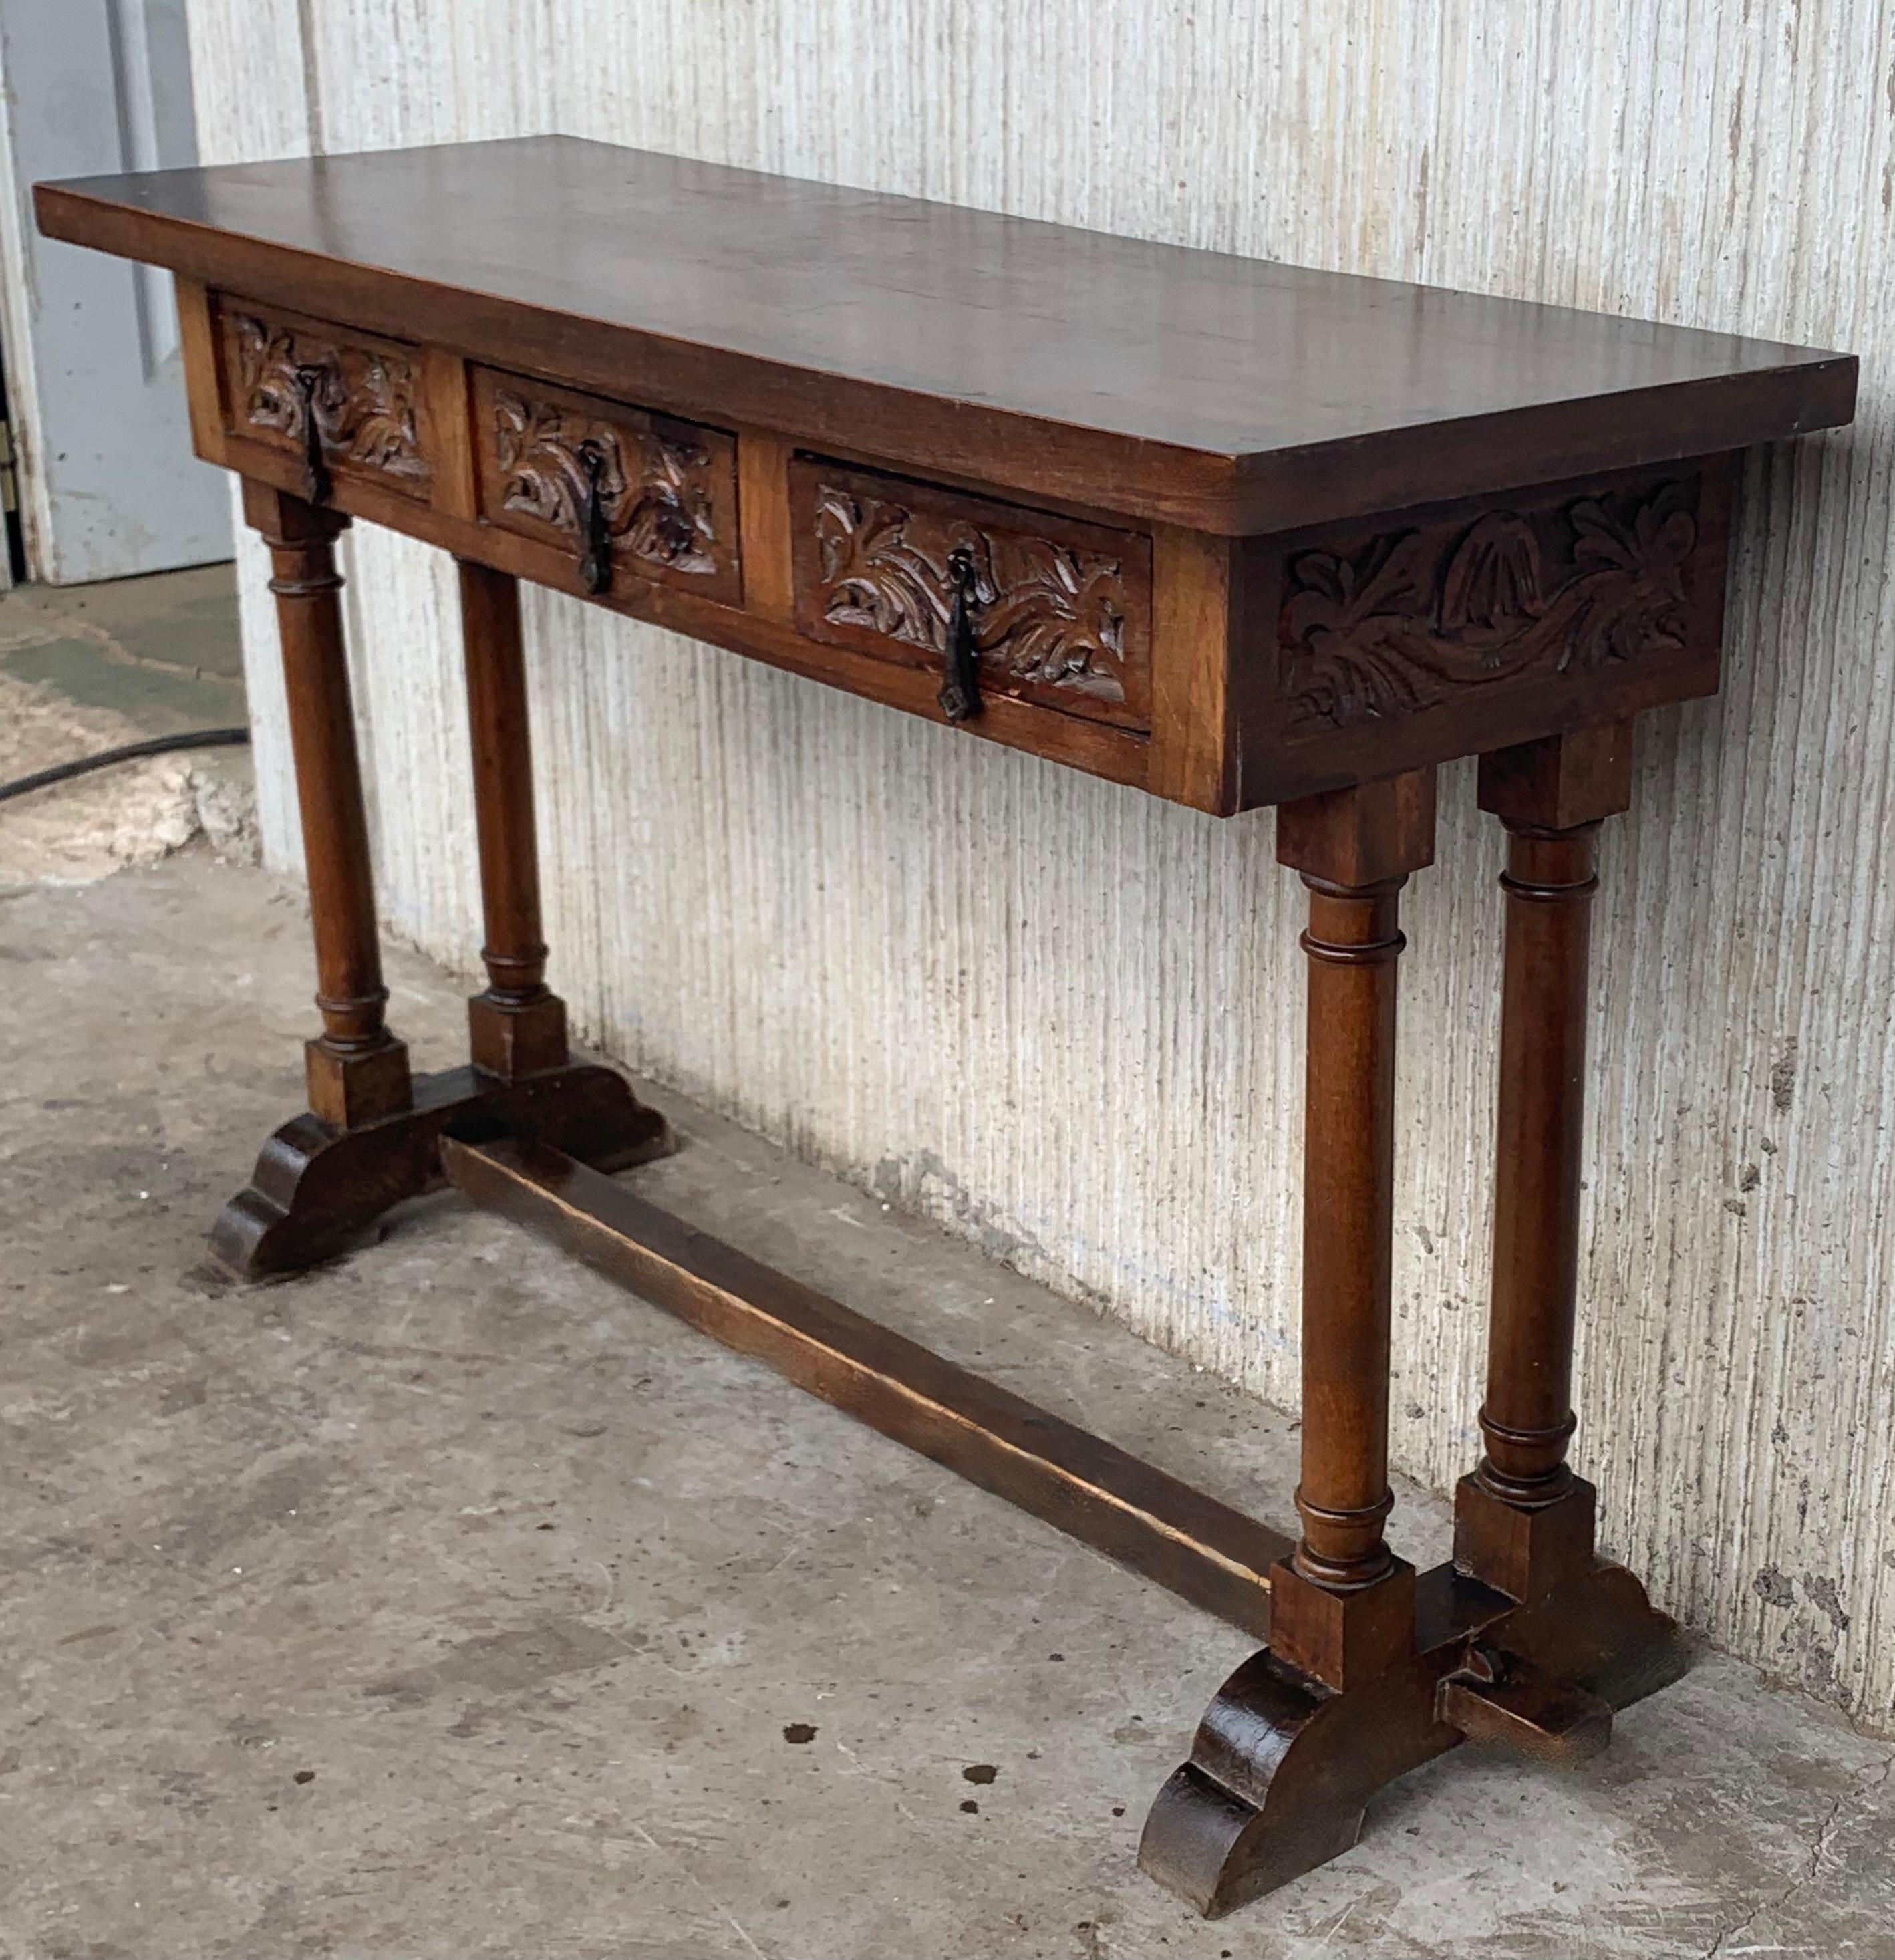 Baroque 20th Century Carved Three-Drawer Spanish Walnut Console Table with Iron Hardware